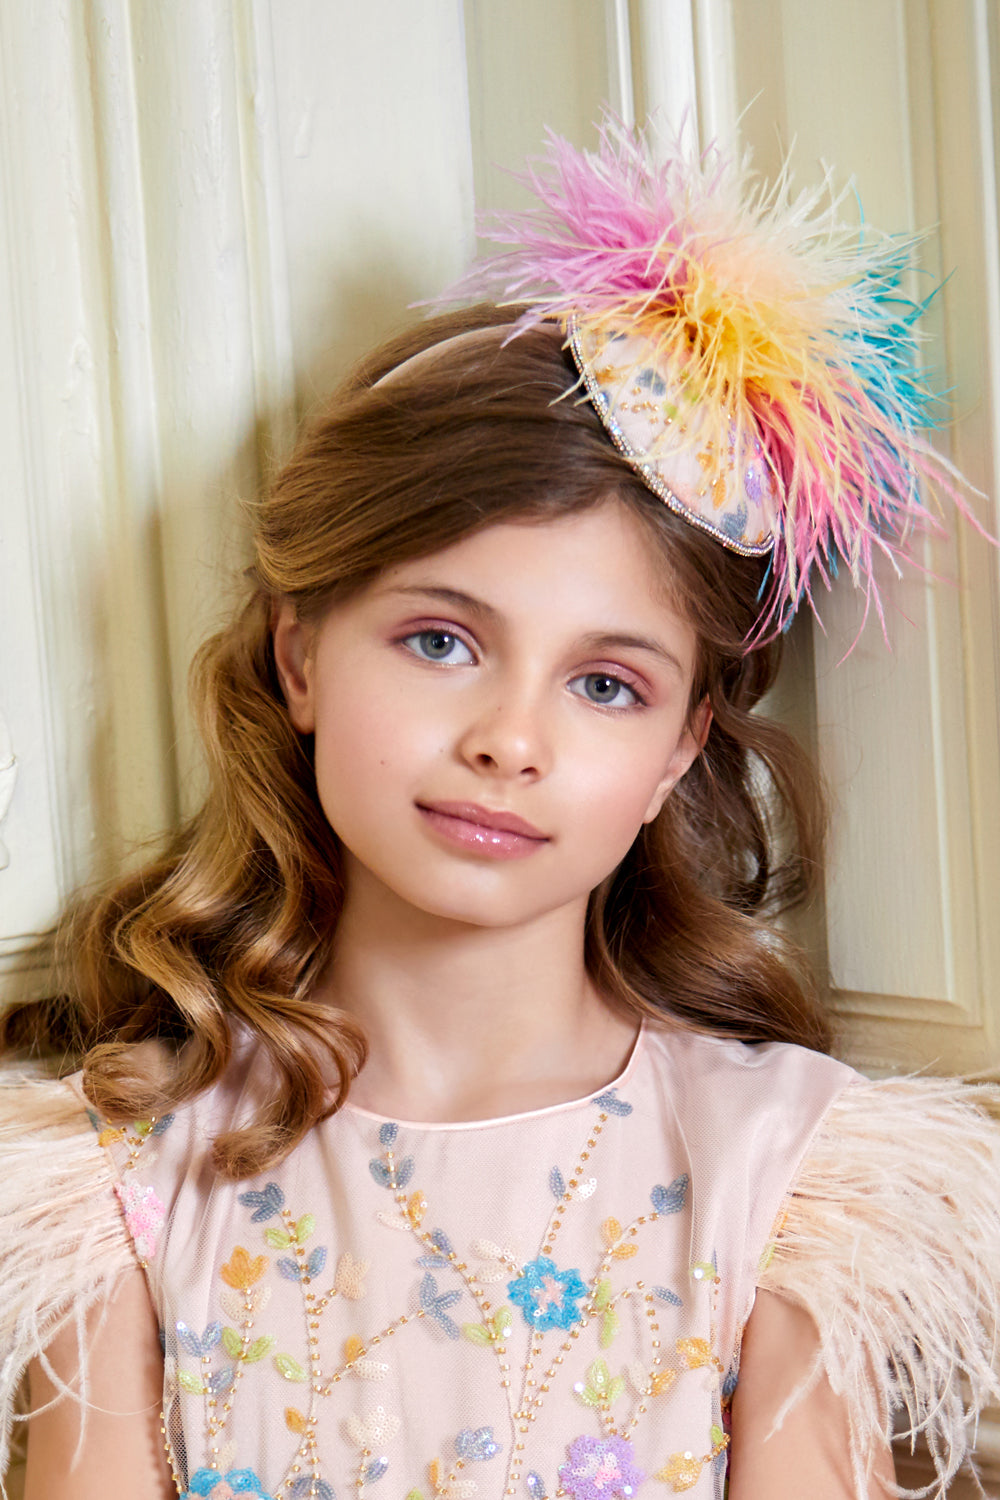 Multi color feathers and lace headband